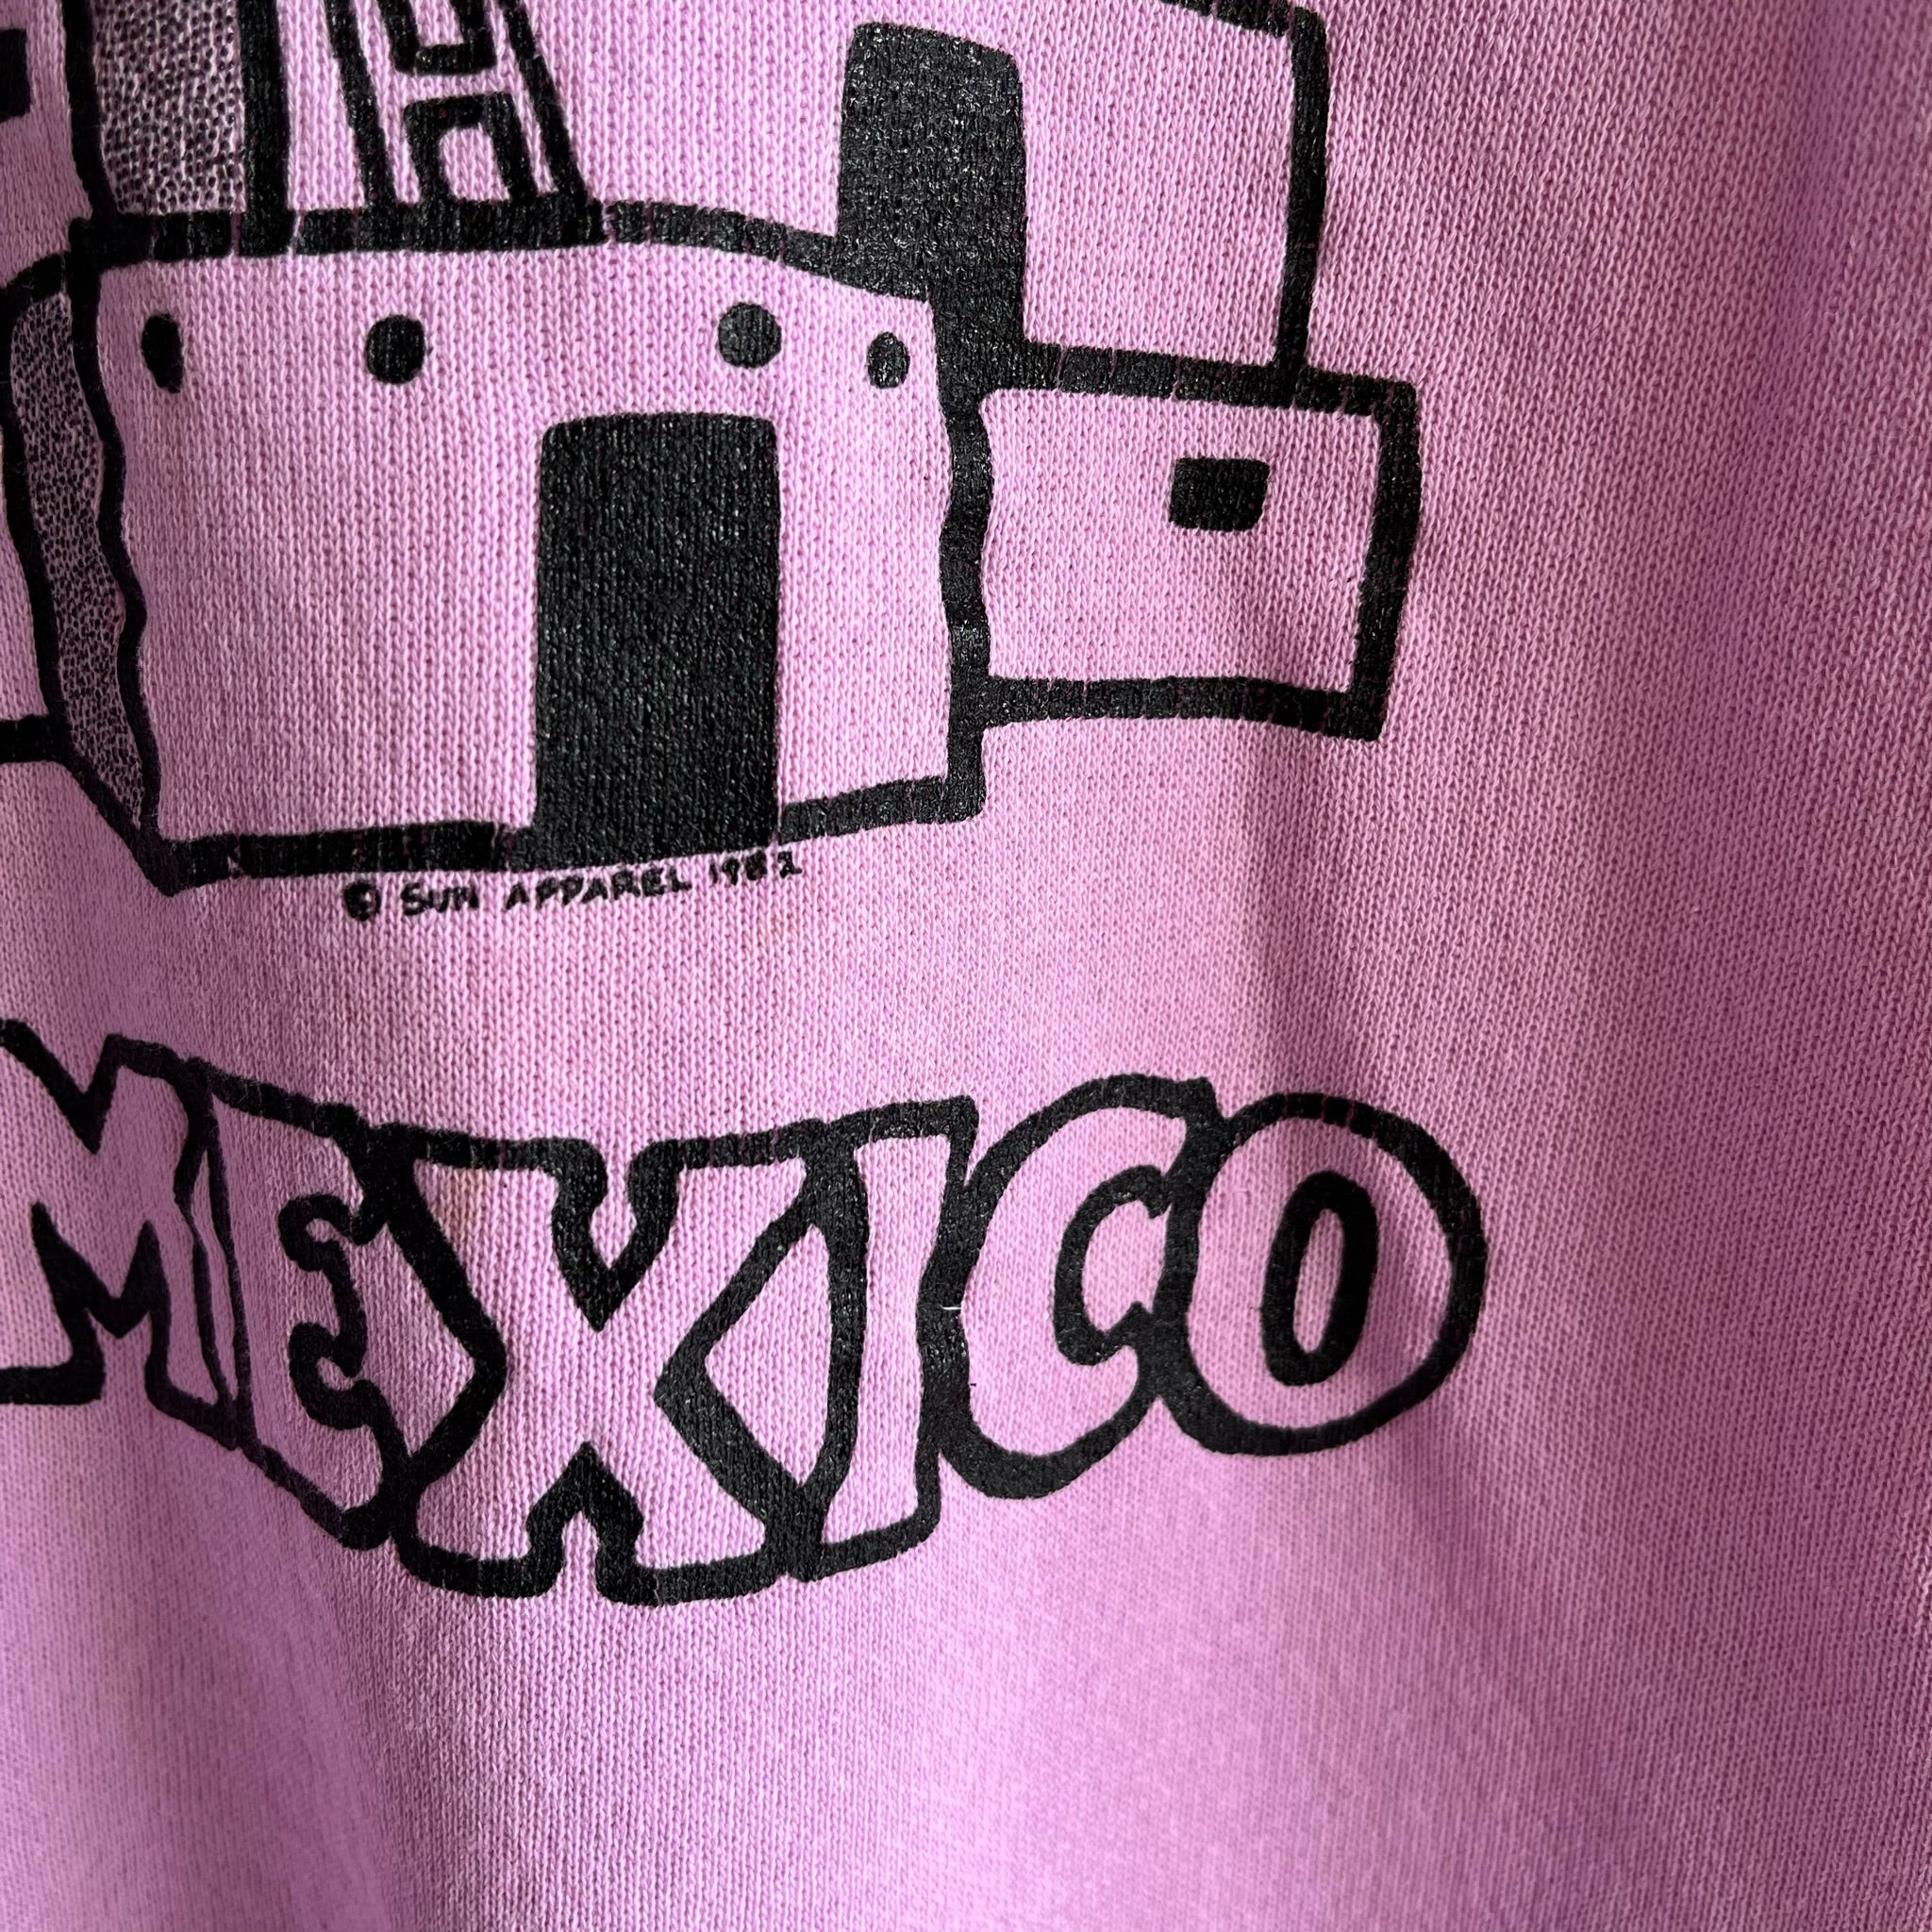 1982 New Mexico Thin and Slouchy Sweatshirt